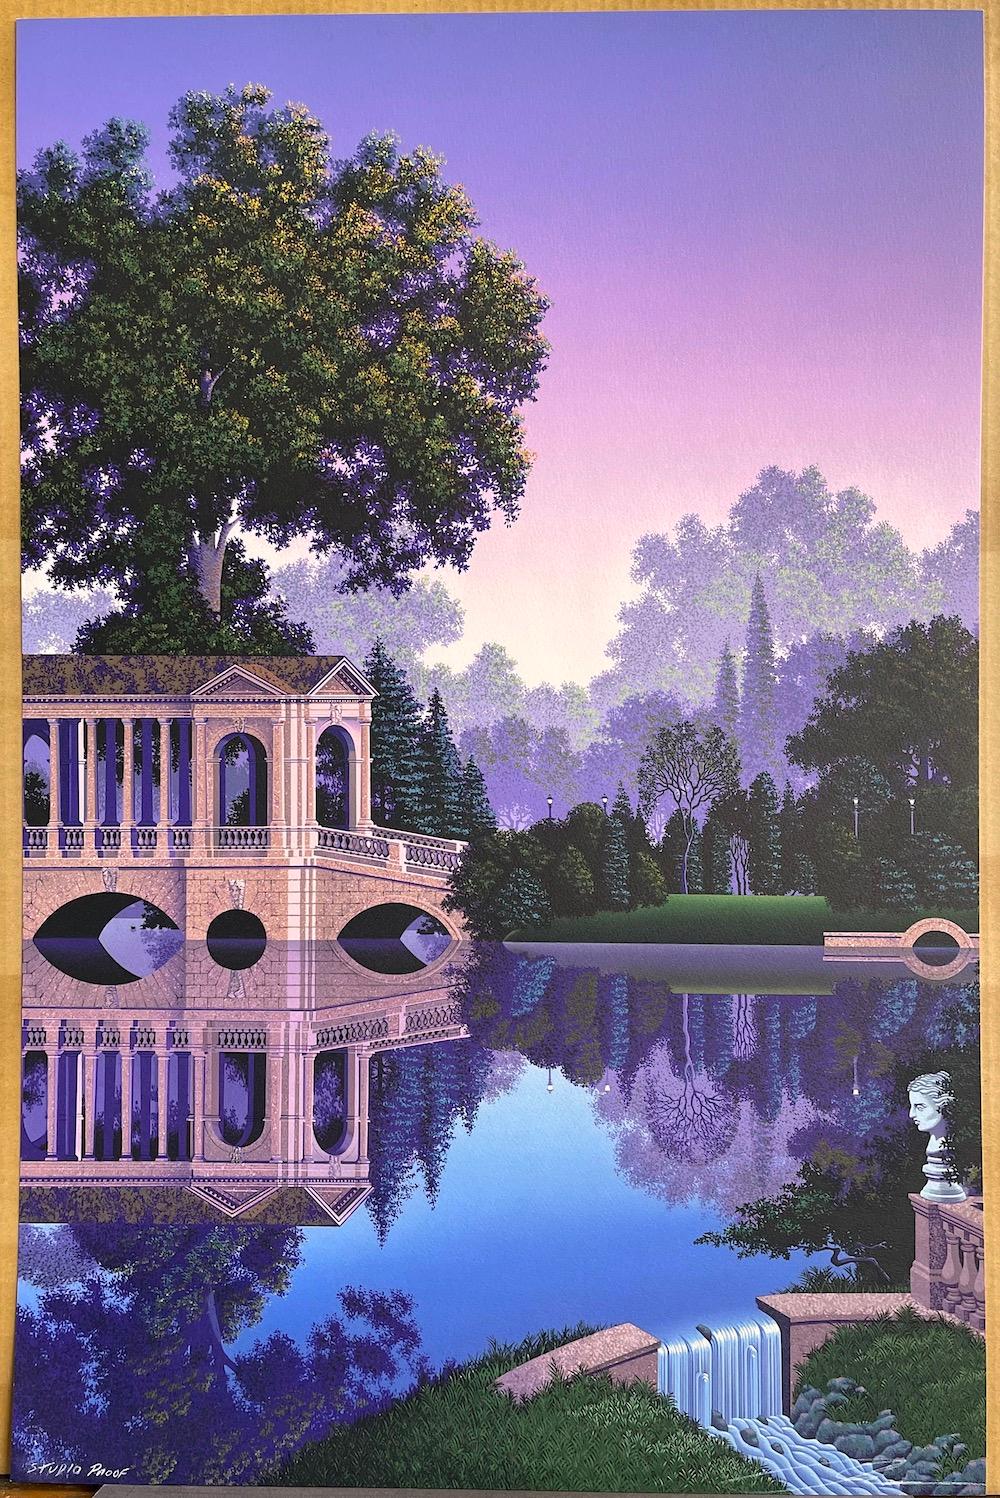 PHAEDRA'S VIGIL Signed Lithograph Purple Fantasy Landscape Blue Reflecting Pool  - Contemporary Print by Jim Buckels